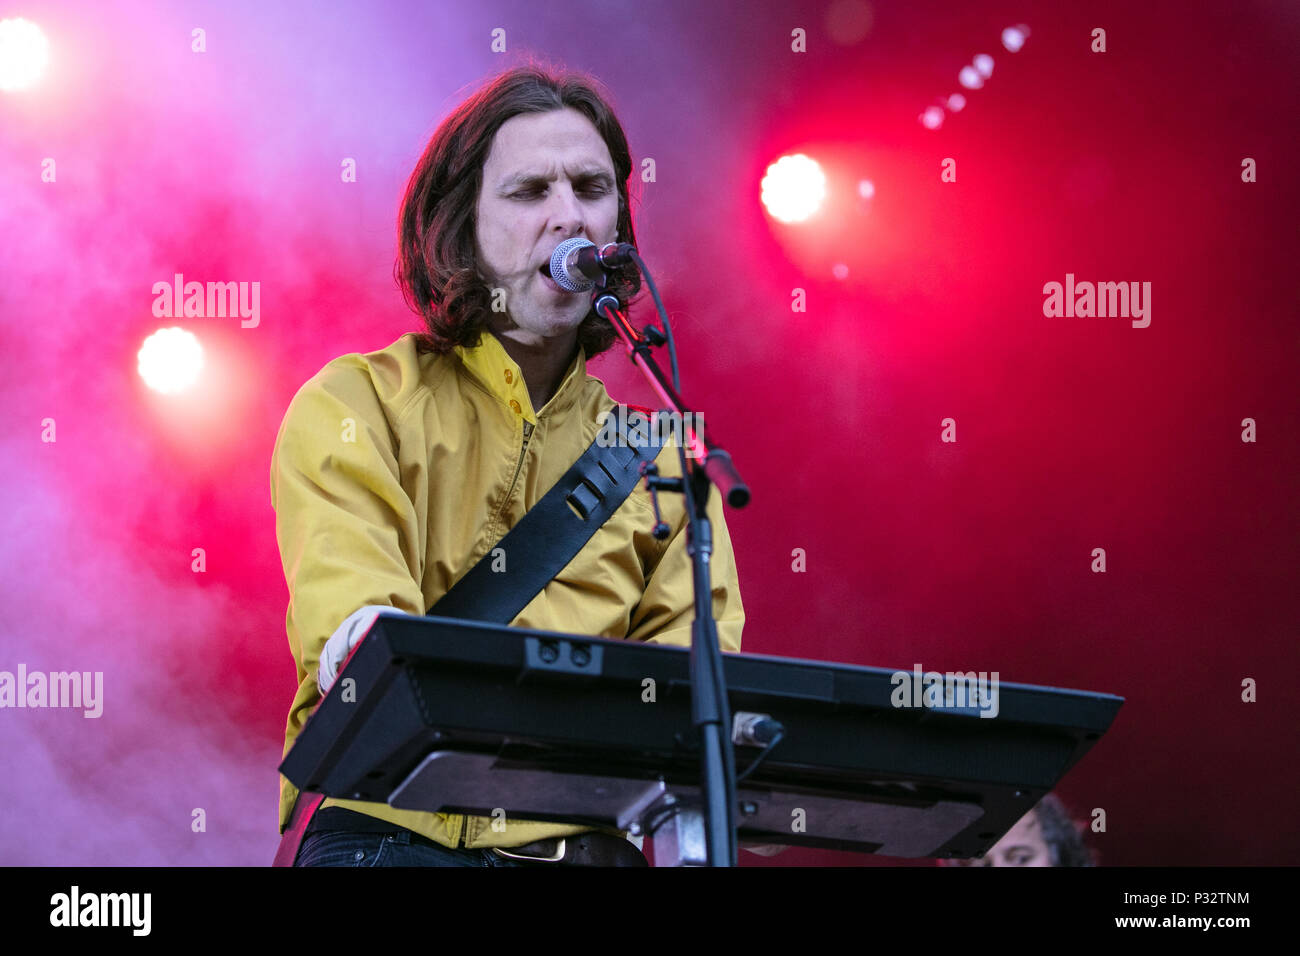 Norway, Oslo - June 16, 2018. The French indie pop band Phoenix performs a  live concert during the Norwegian music festival Piknik i Parken 2018 in  Oslo. Here musician and singer Deck